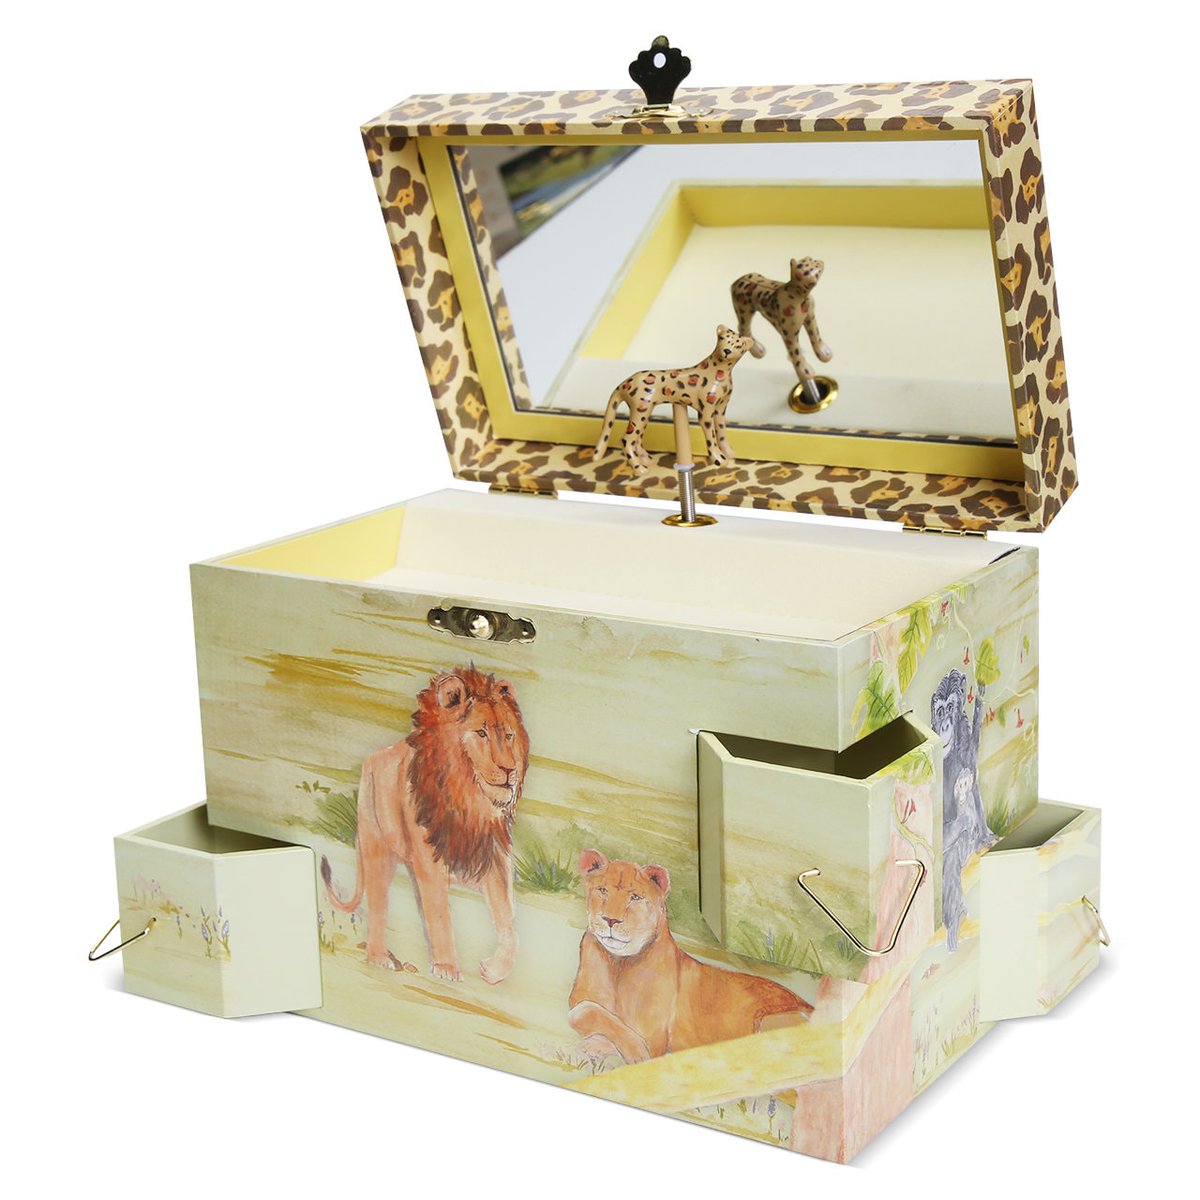 Excited to share the latest addition to my #etsy shop: Enchantmints Leopard Musical jewelry Box for kids etsy.me/3Vw2is0 #musicbox #jewelryorganizer #nurserydecor #memorybox #keepsakebox #giftsforkids #giftsforgirls #treasurechest #birthdaygift